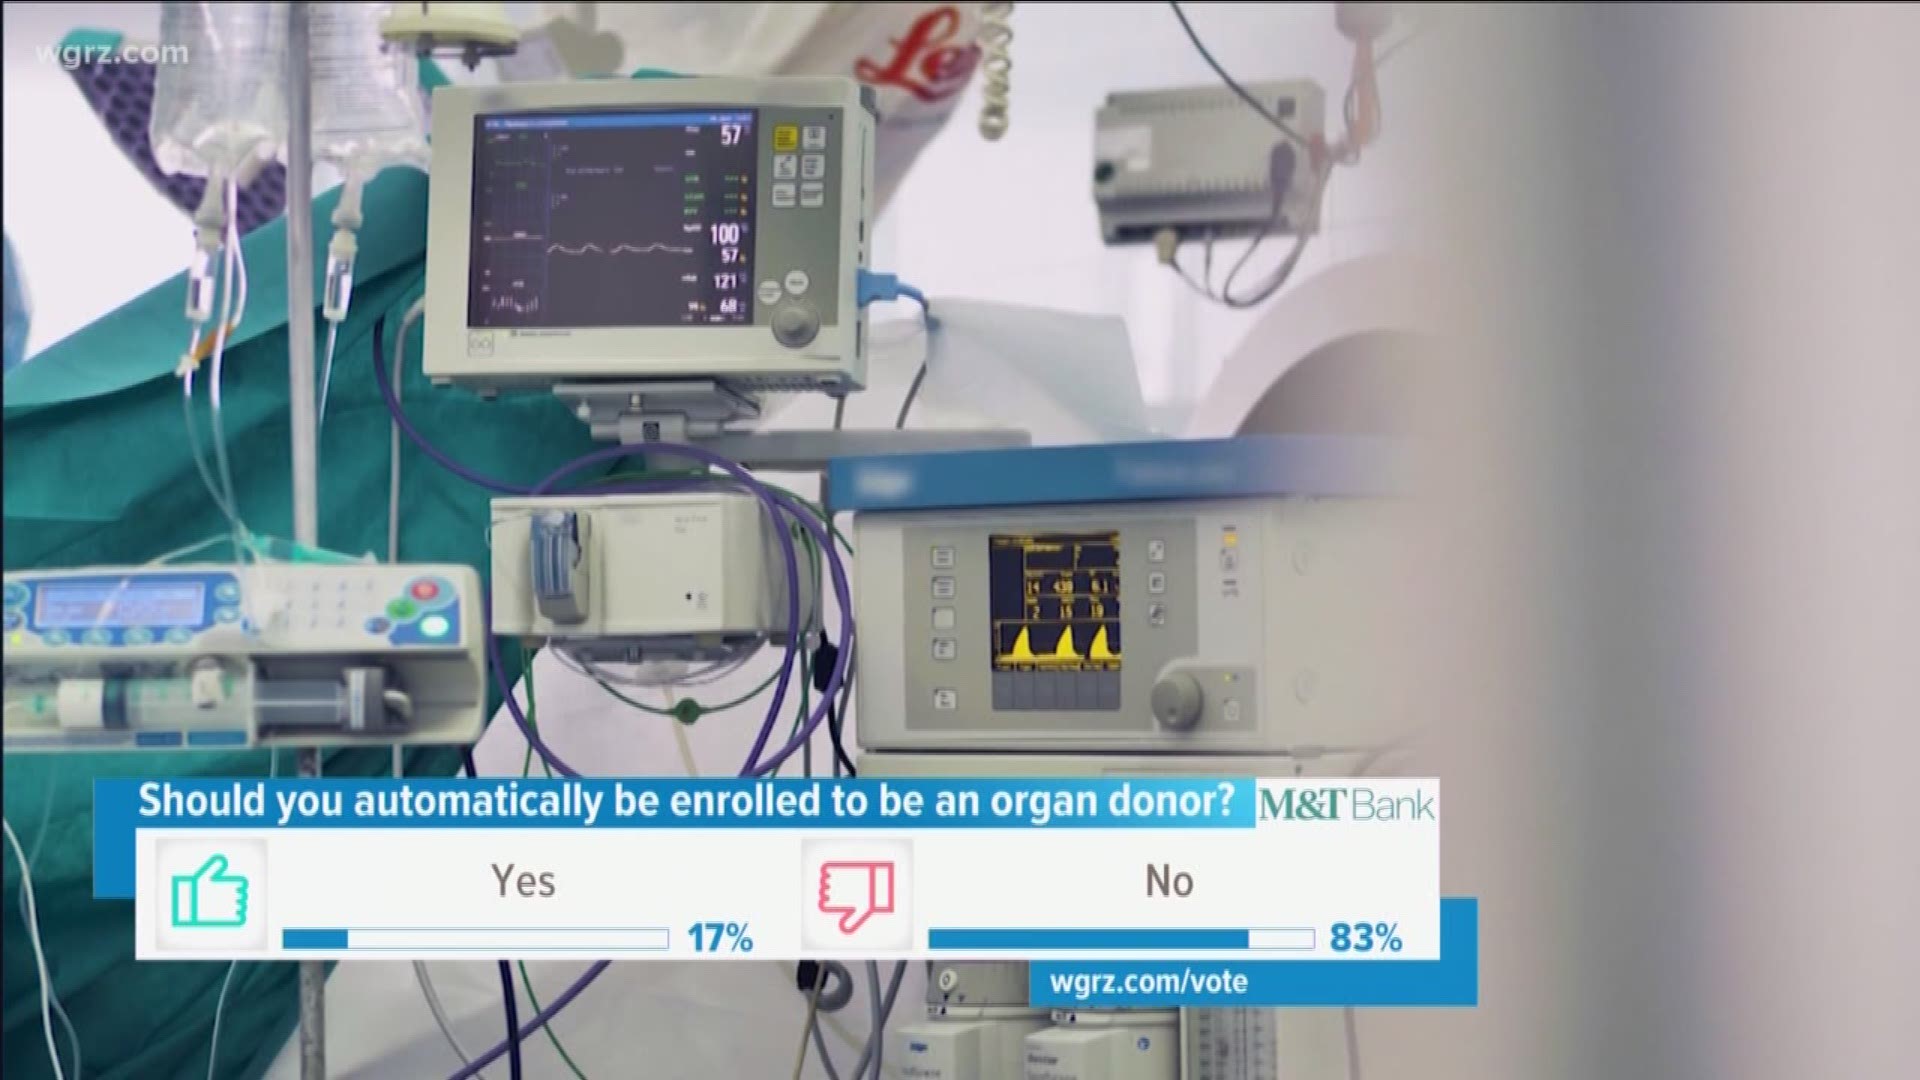 New proposal would require people opt-out of organ donation, rather than opt-in